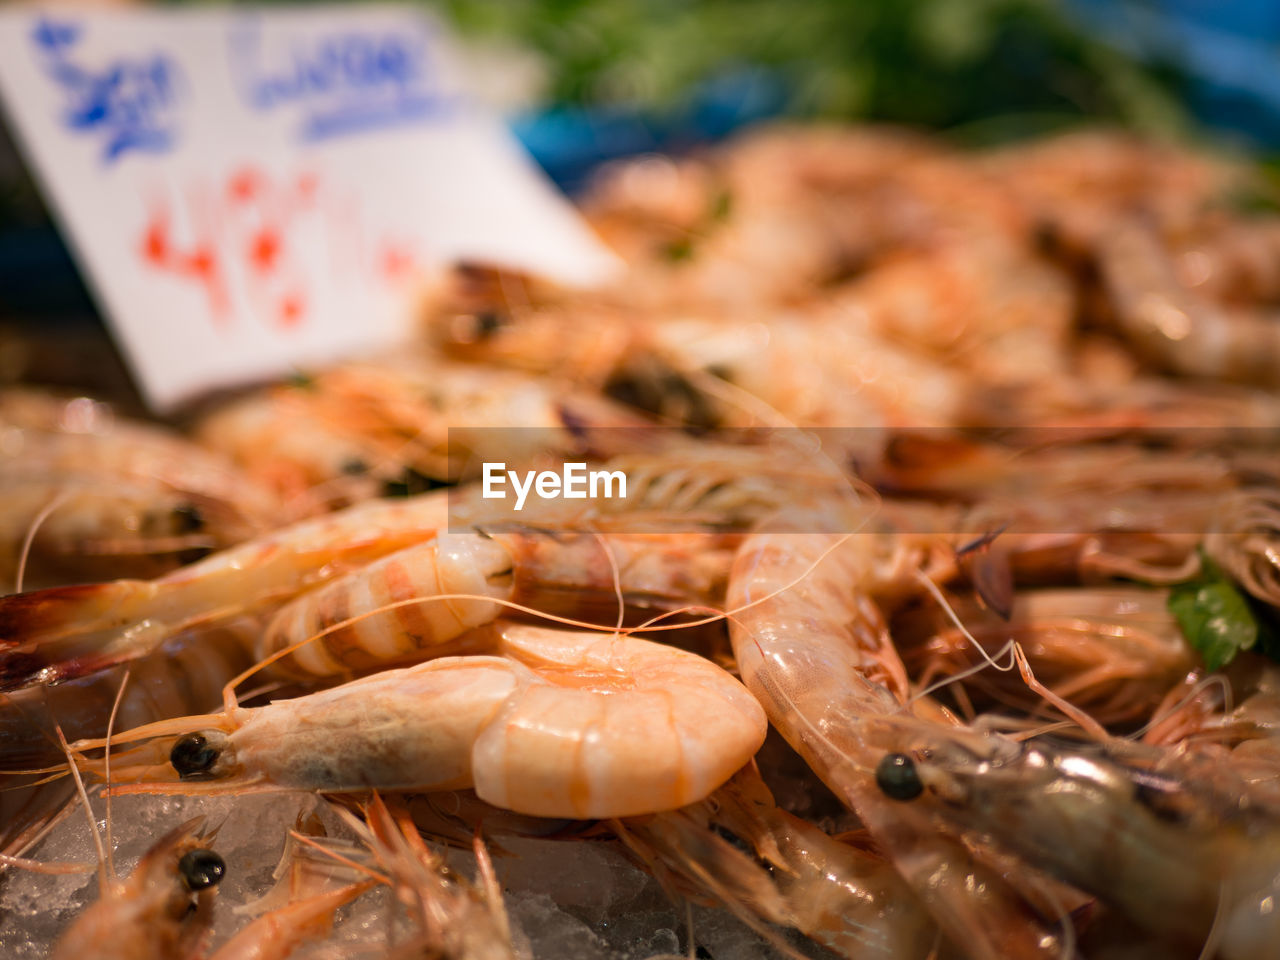 Close-up of prawns for sale at market stall